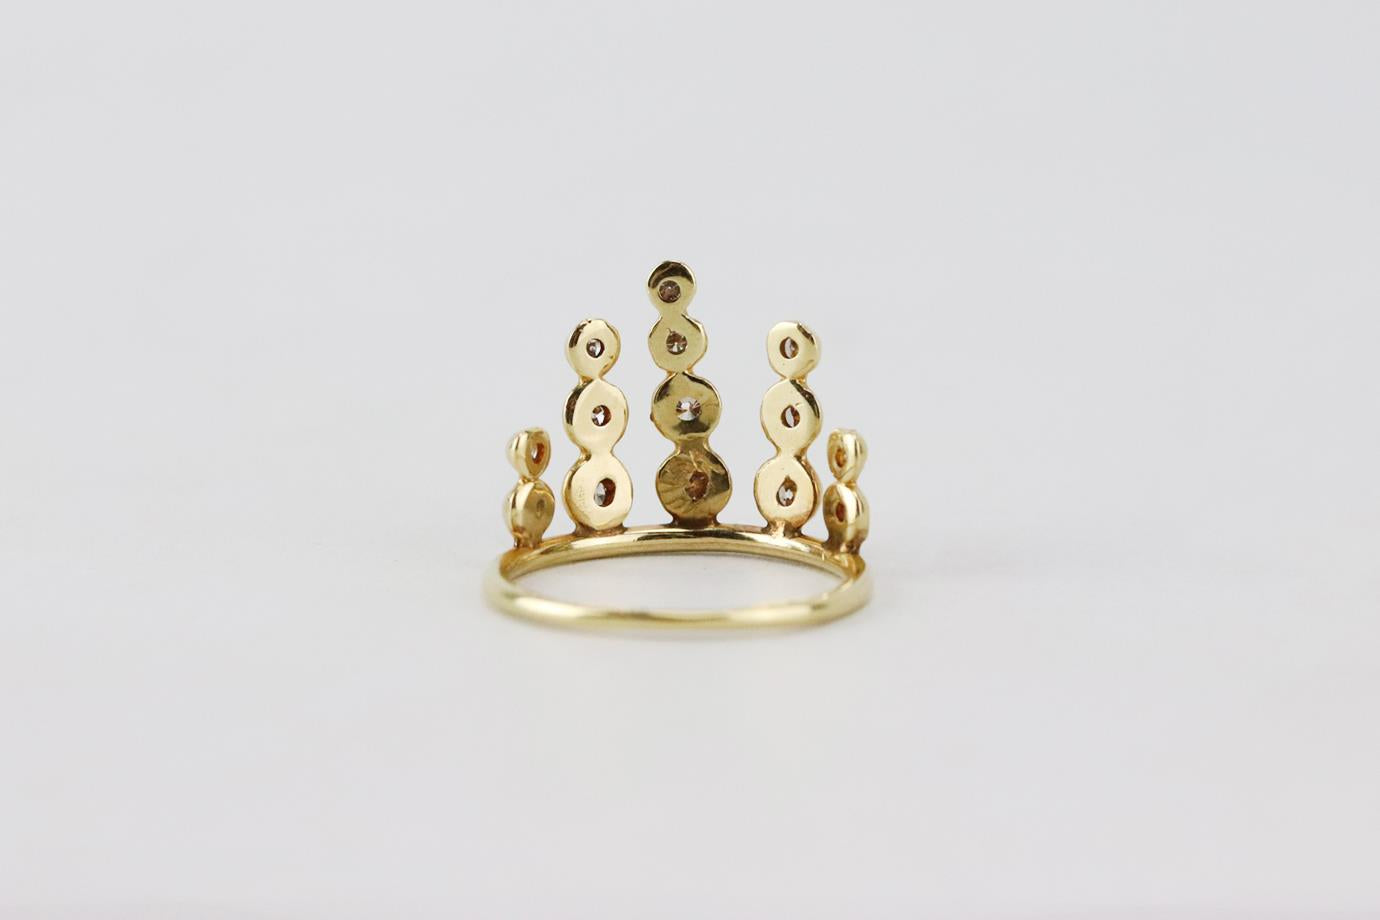 JACQUIE AICHE 14K YELLOW GOLD PAVE DIAMOND STACK RING 16 MM